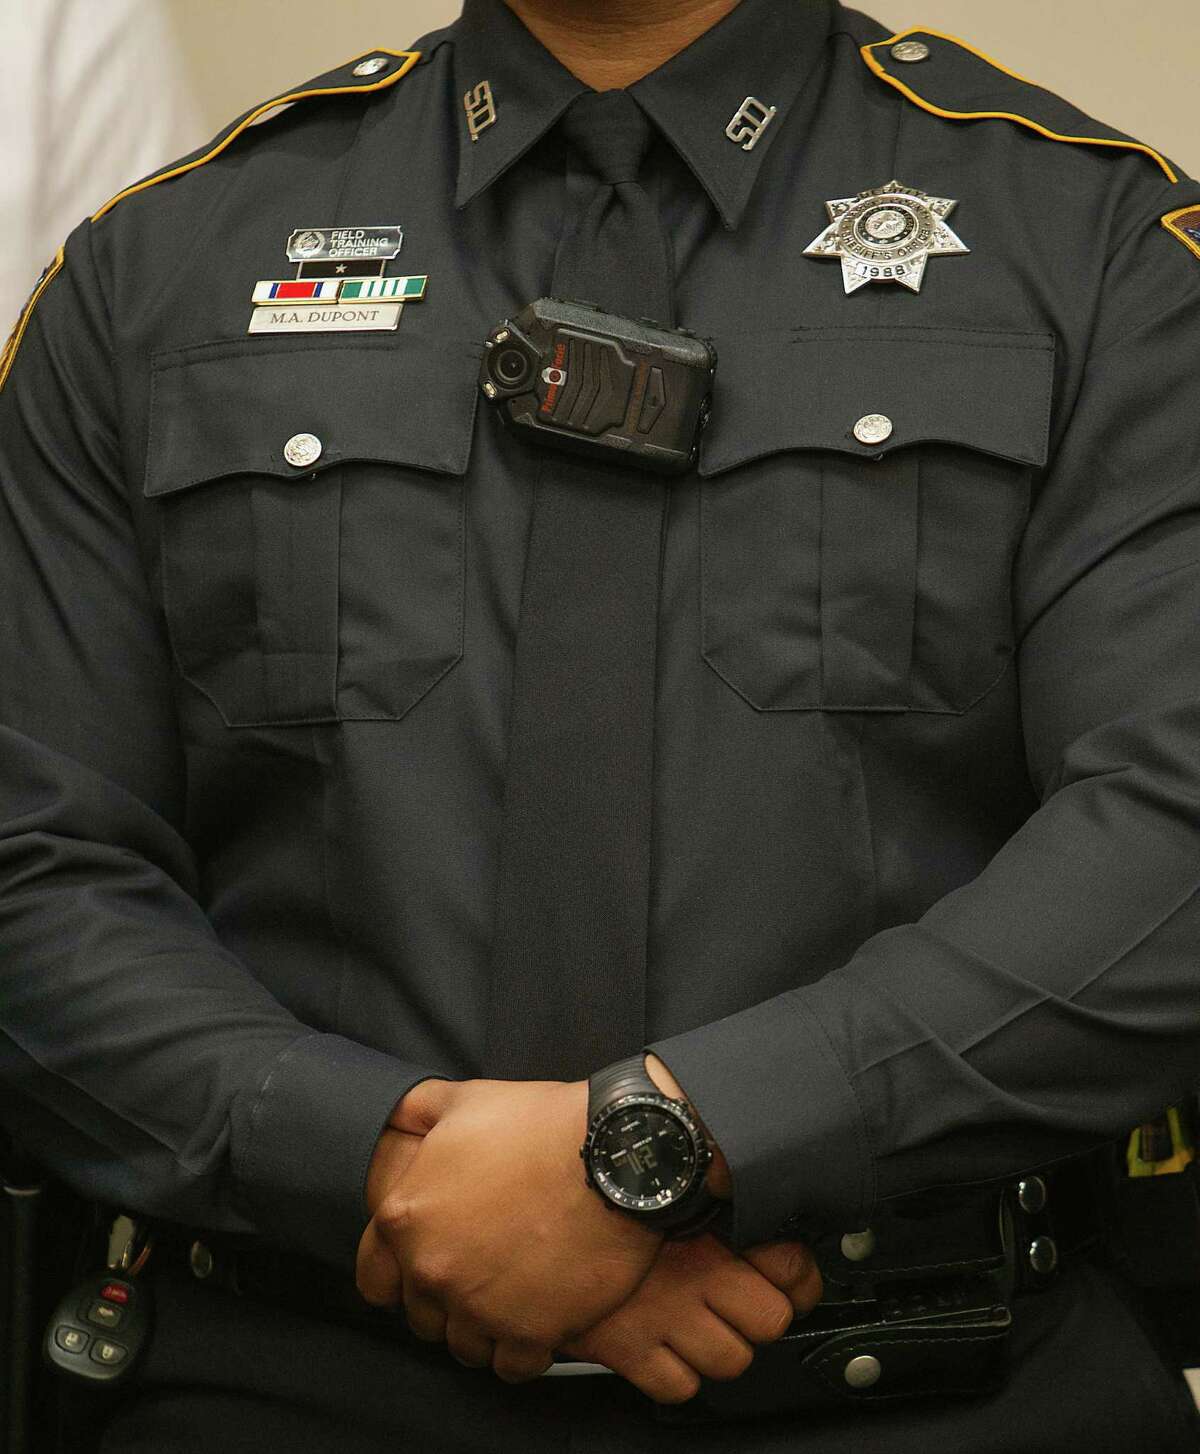 ﻿An analyst for the San Antonio Police Department said costs to review, edit and release body camera footage could reach up to $10 million over five years.